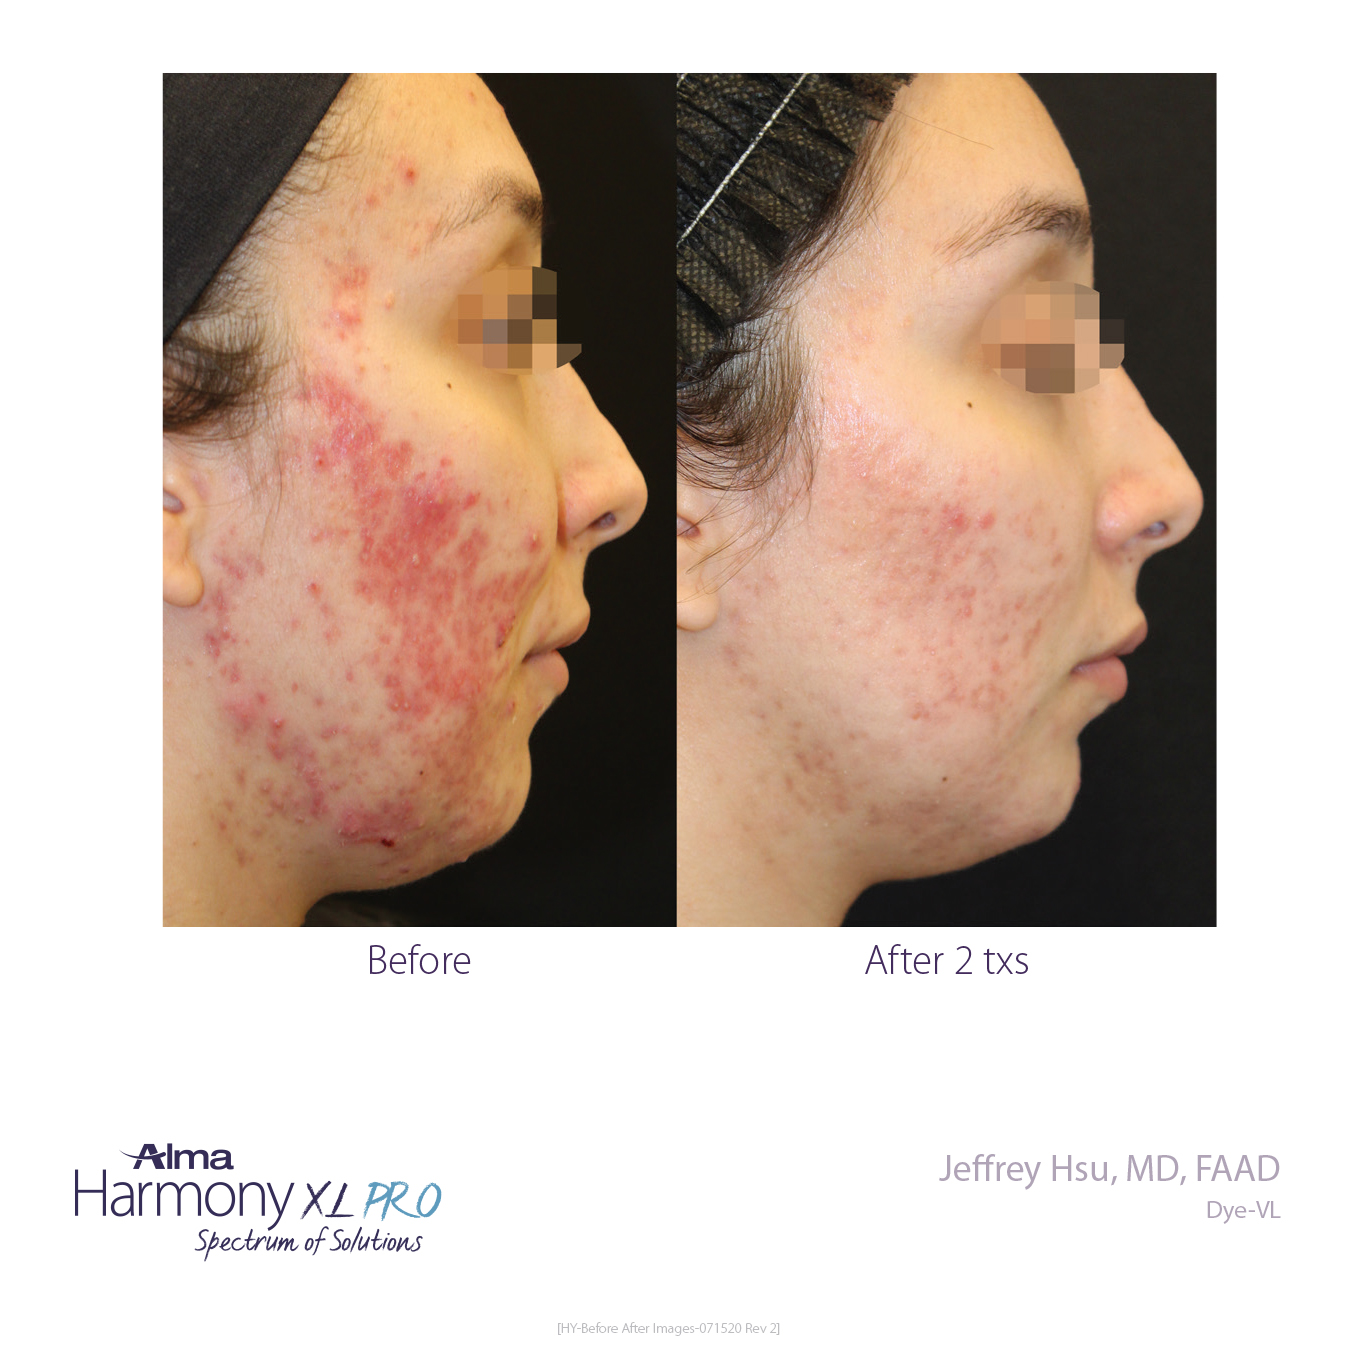 Dye-VL Acne Before and After with Harmony XL PRO